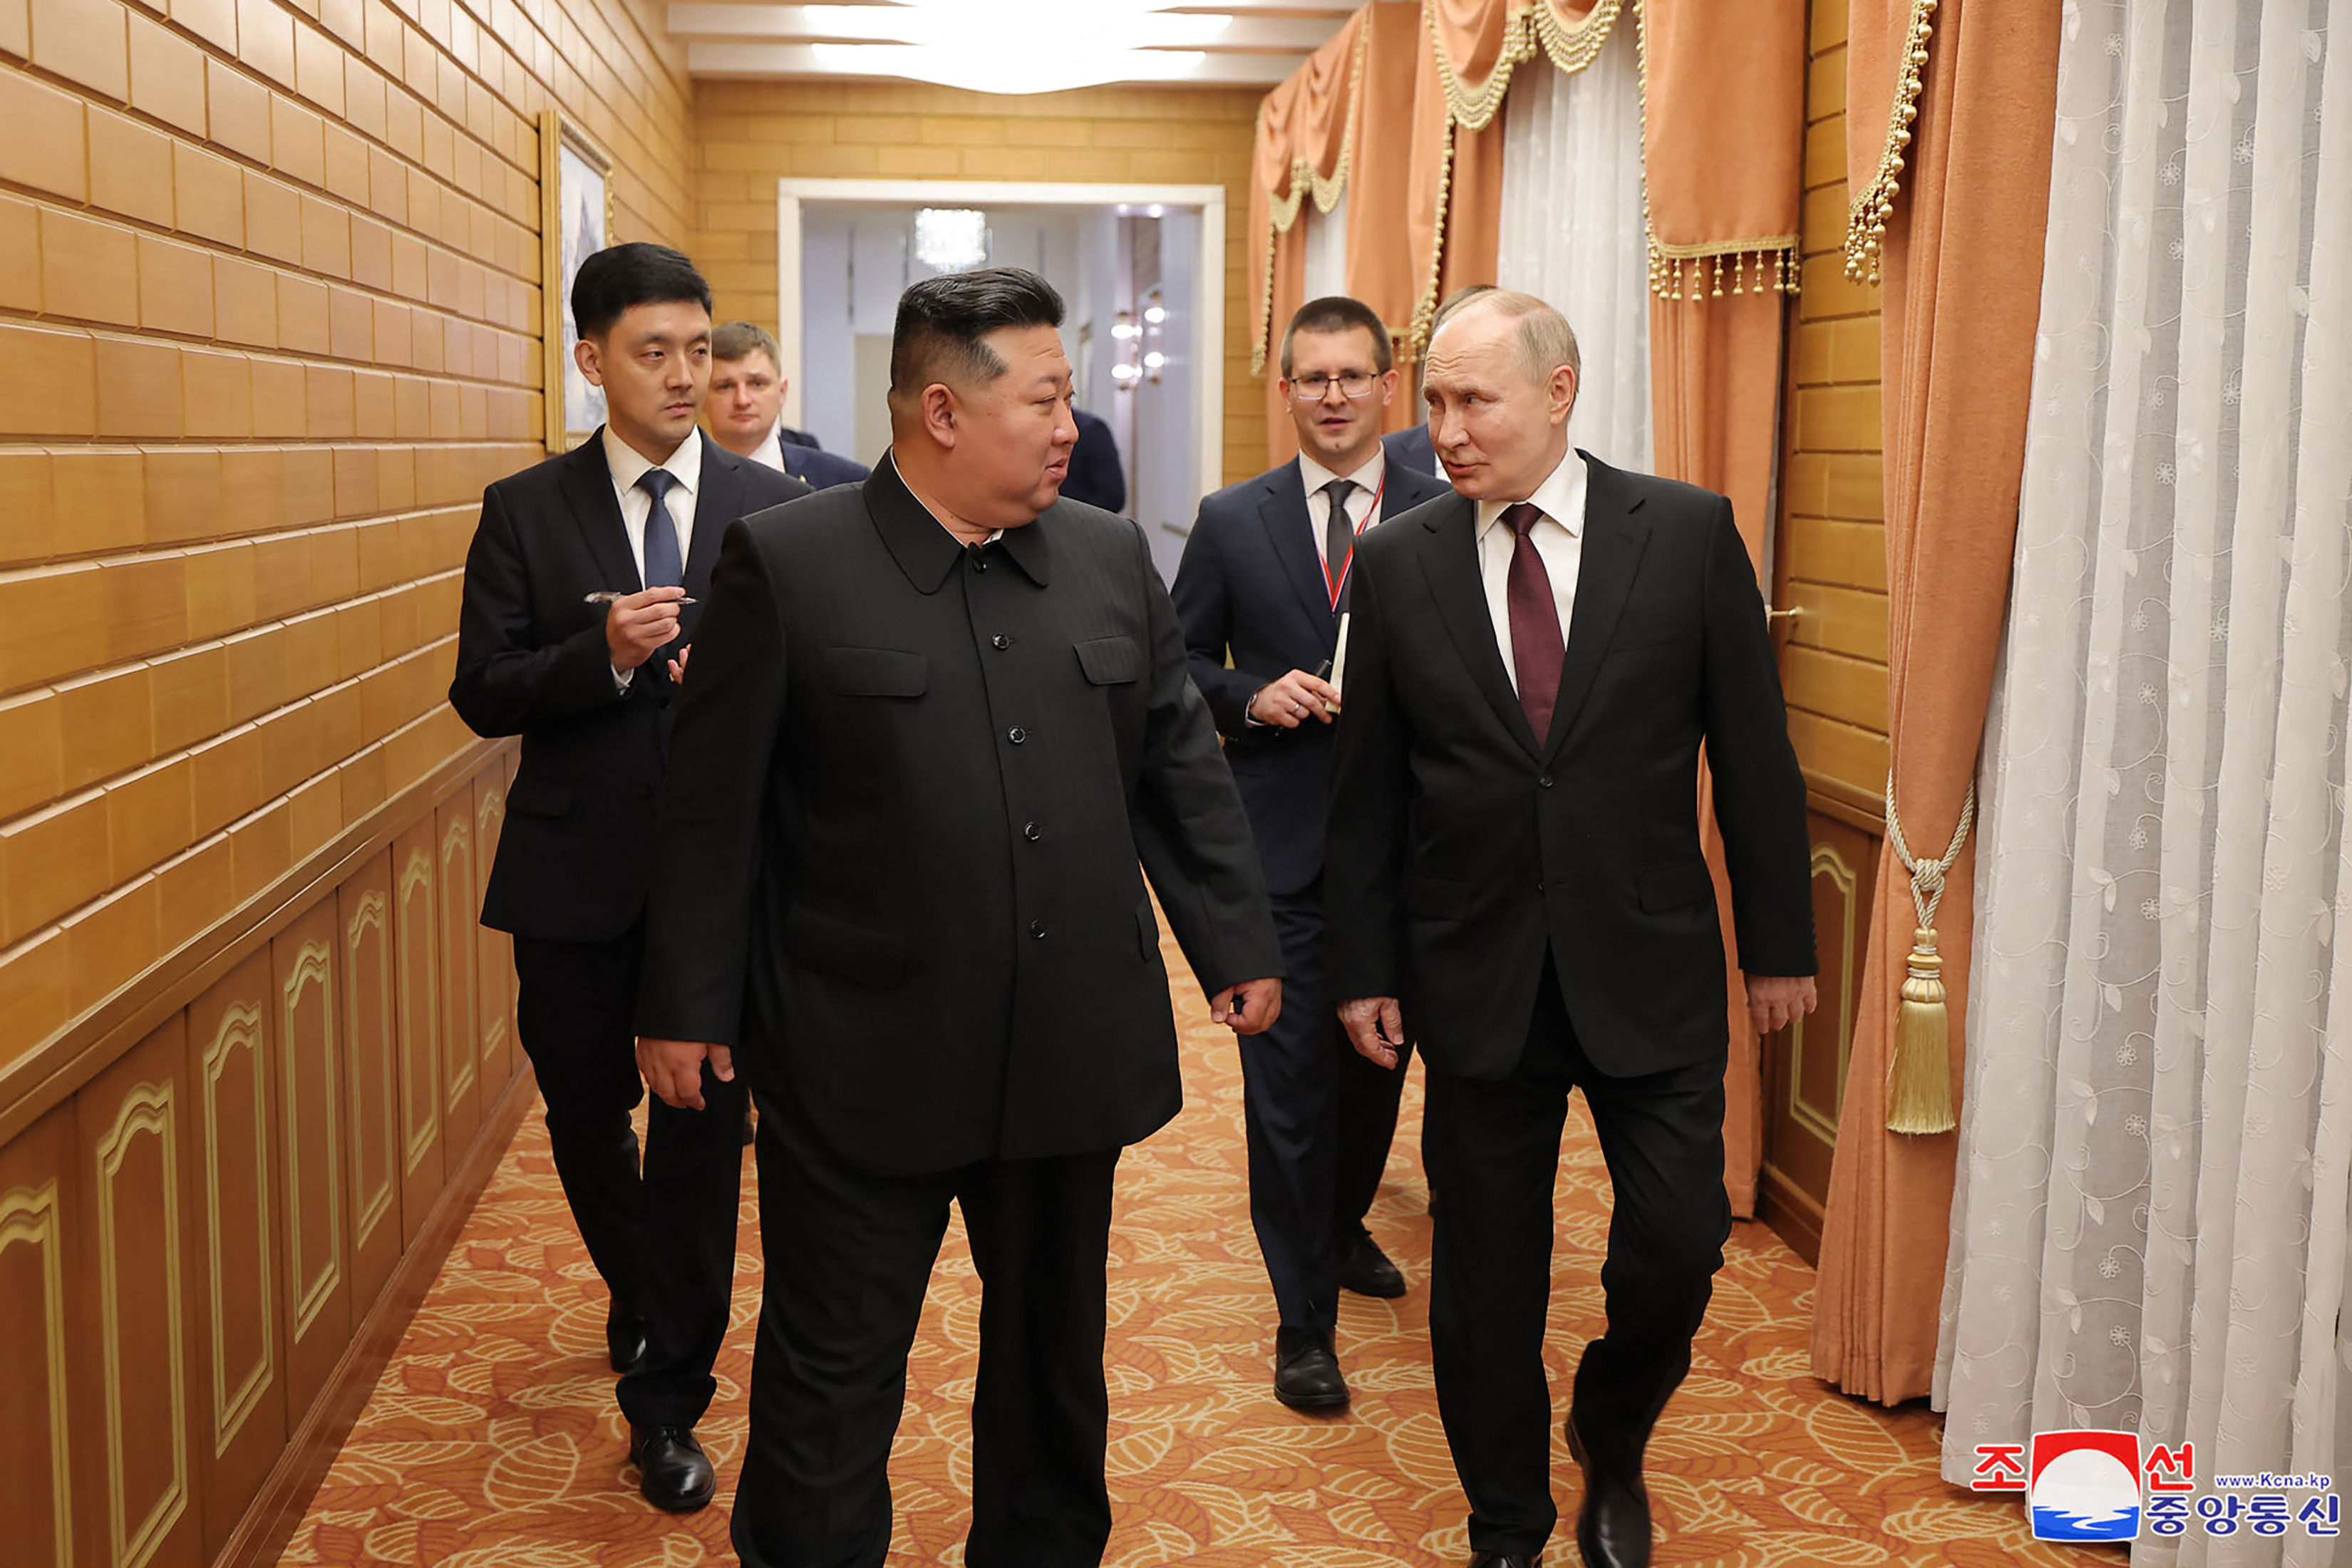 Putin and Kim smiling and chatting as they walk along a corridor in the Kumsusan State Guest House in Pyongyang. Officials are walking behind them.